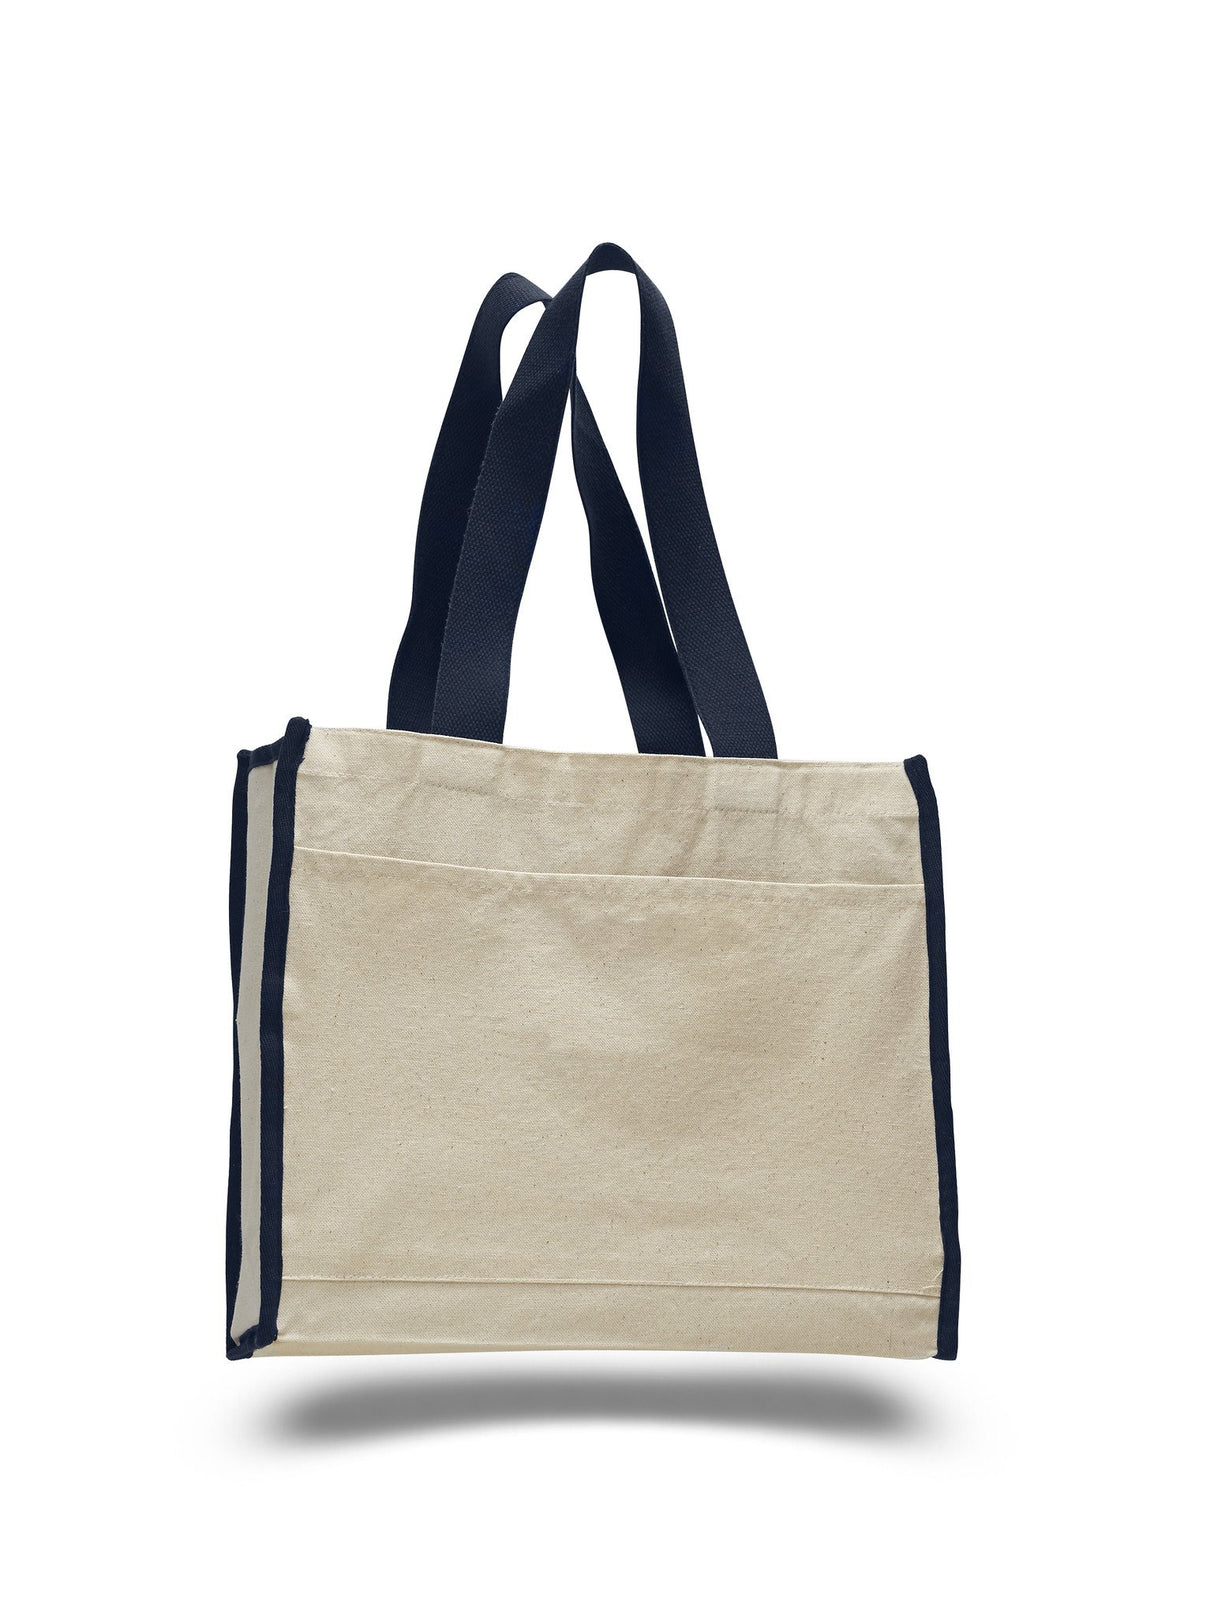 Durable Coton Tote Bag with Navy Colored Trim